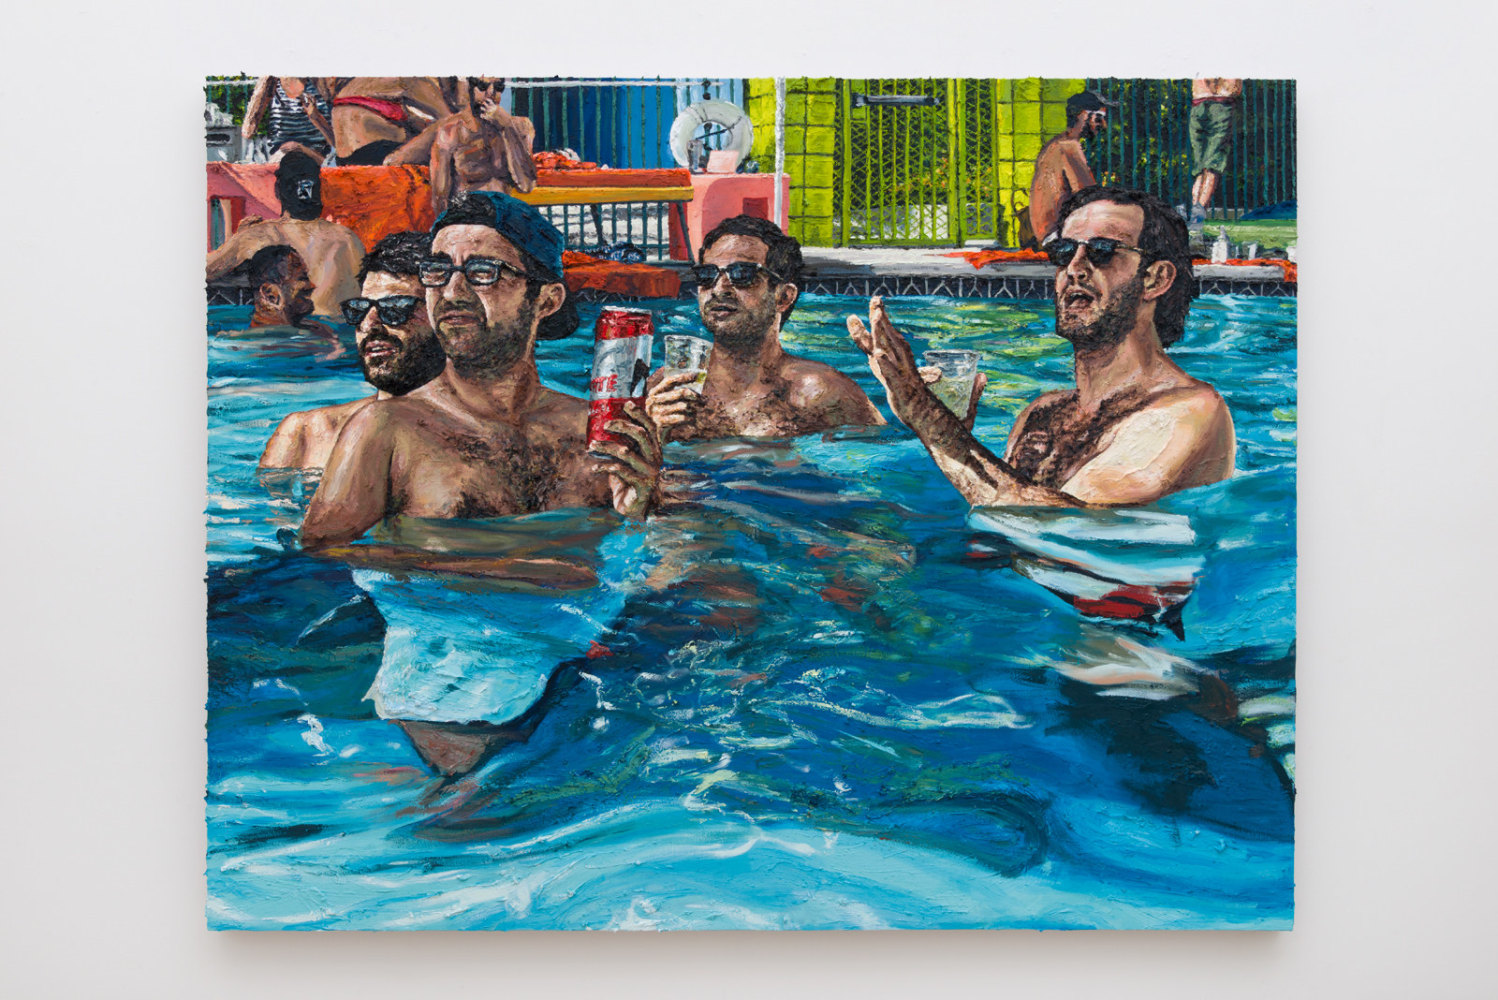 Joey Wolf

4 dudes in pool, 2016

Oil on canvas

55 x 70 inches